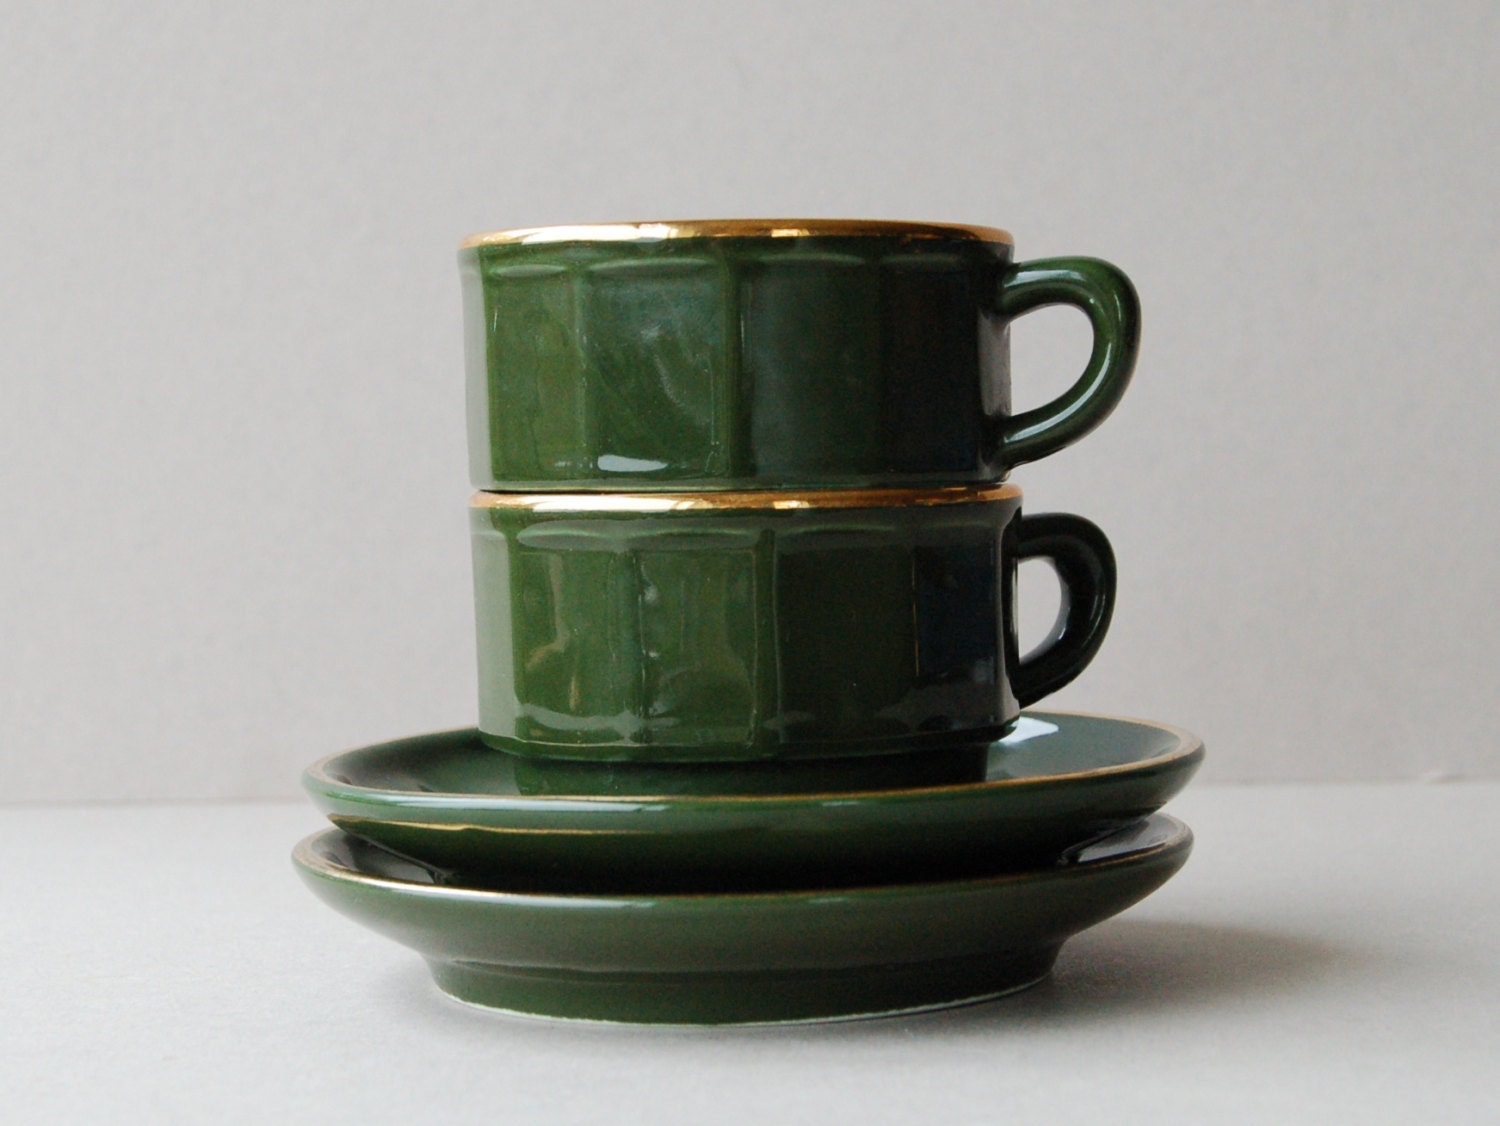 Vintage Apilco French bistro coffee cups green and gold Apilco